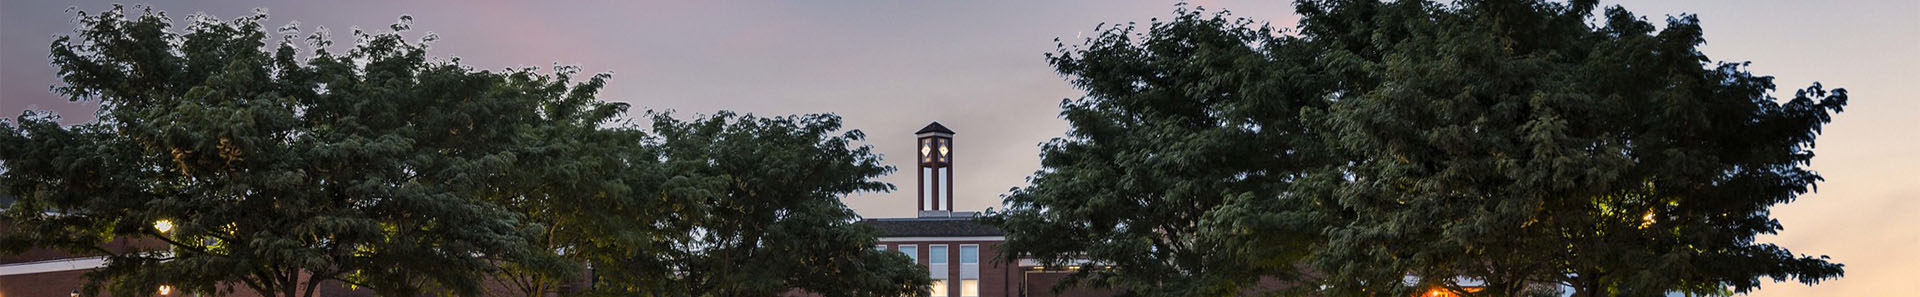 Photo of Langston main campus with clock tower and trees in an evening sky